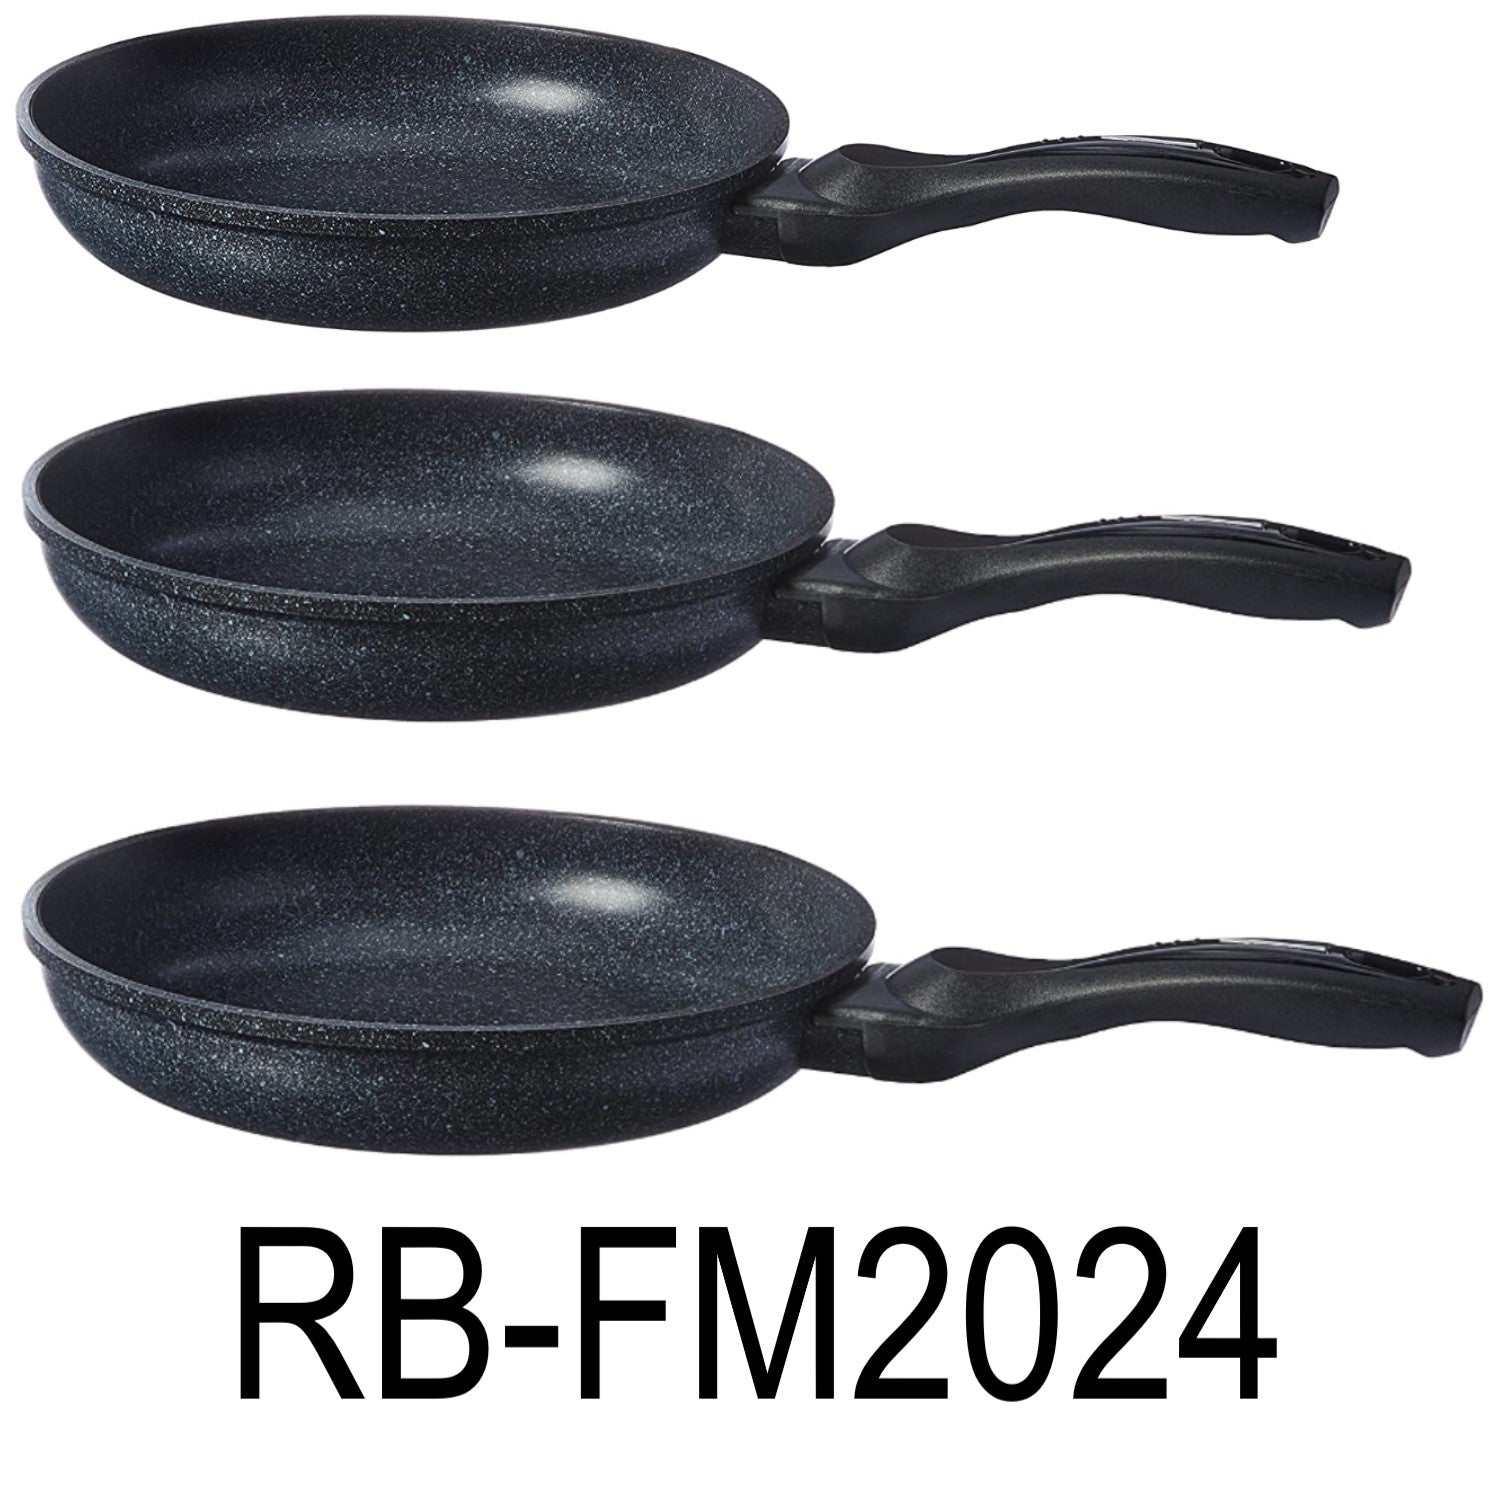 3pc Frypan Set, Frying pan, Marble stone, Non-stick, Induction, cookware  set